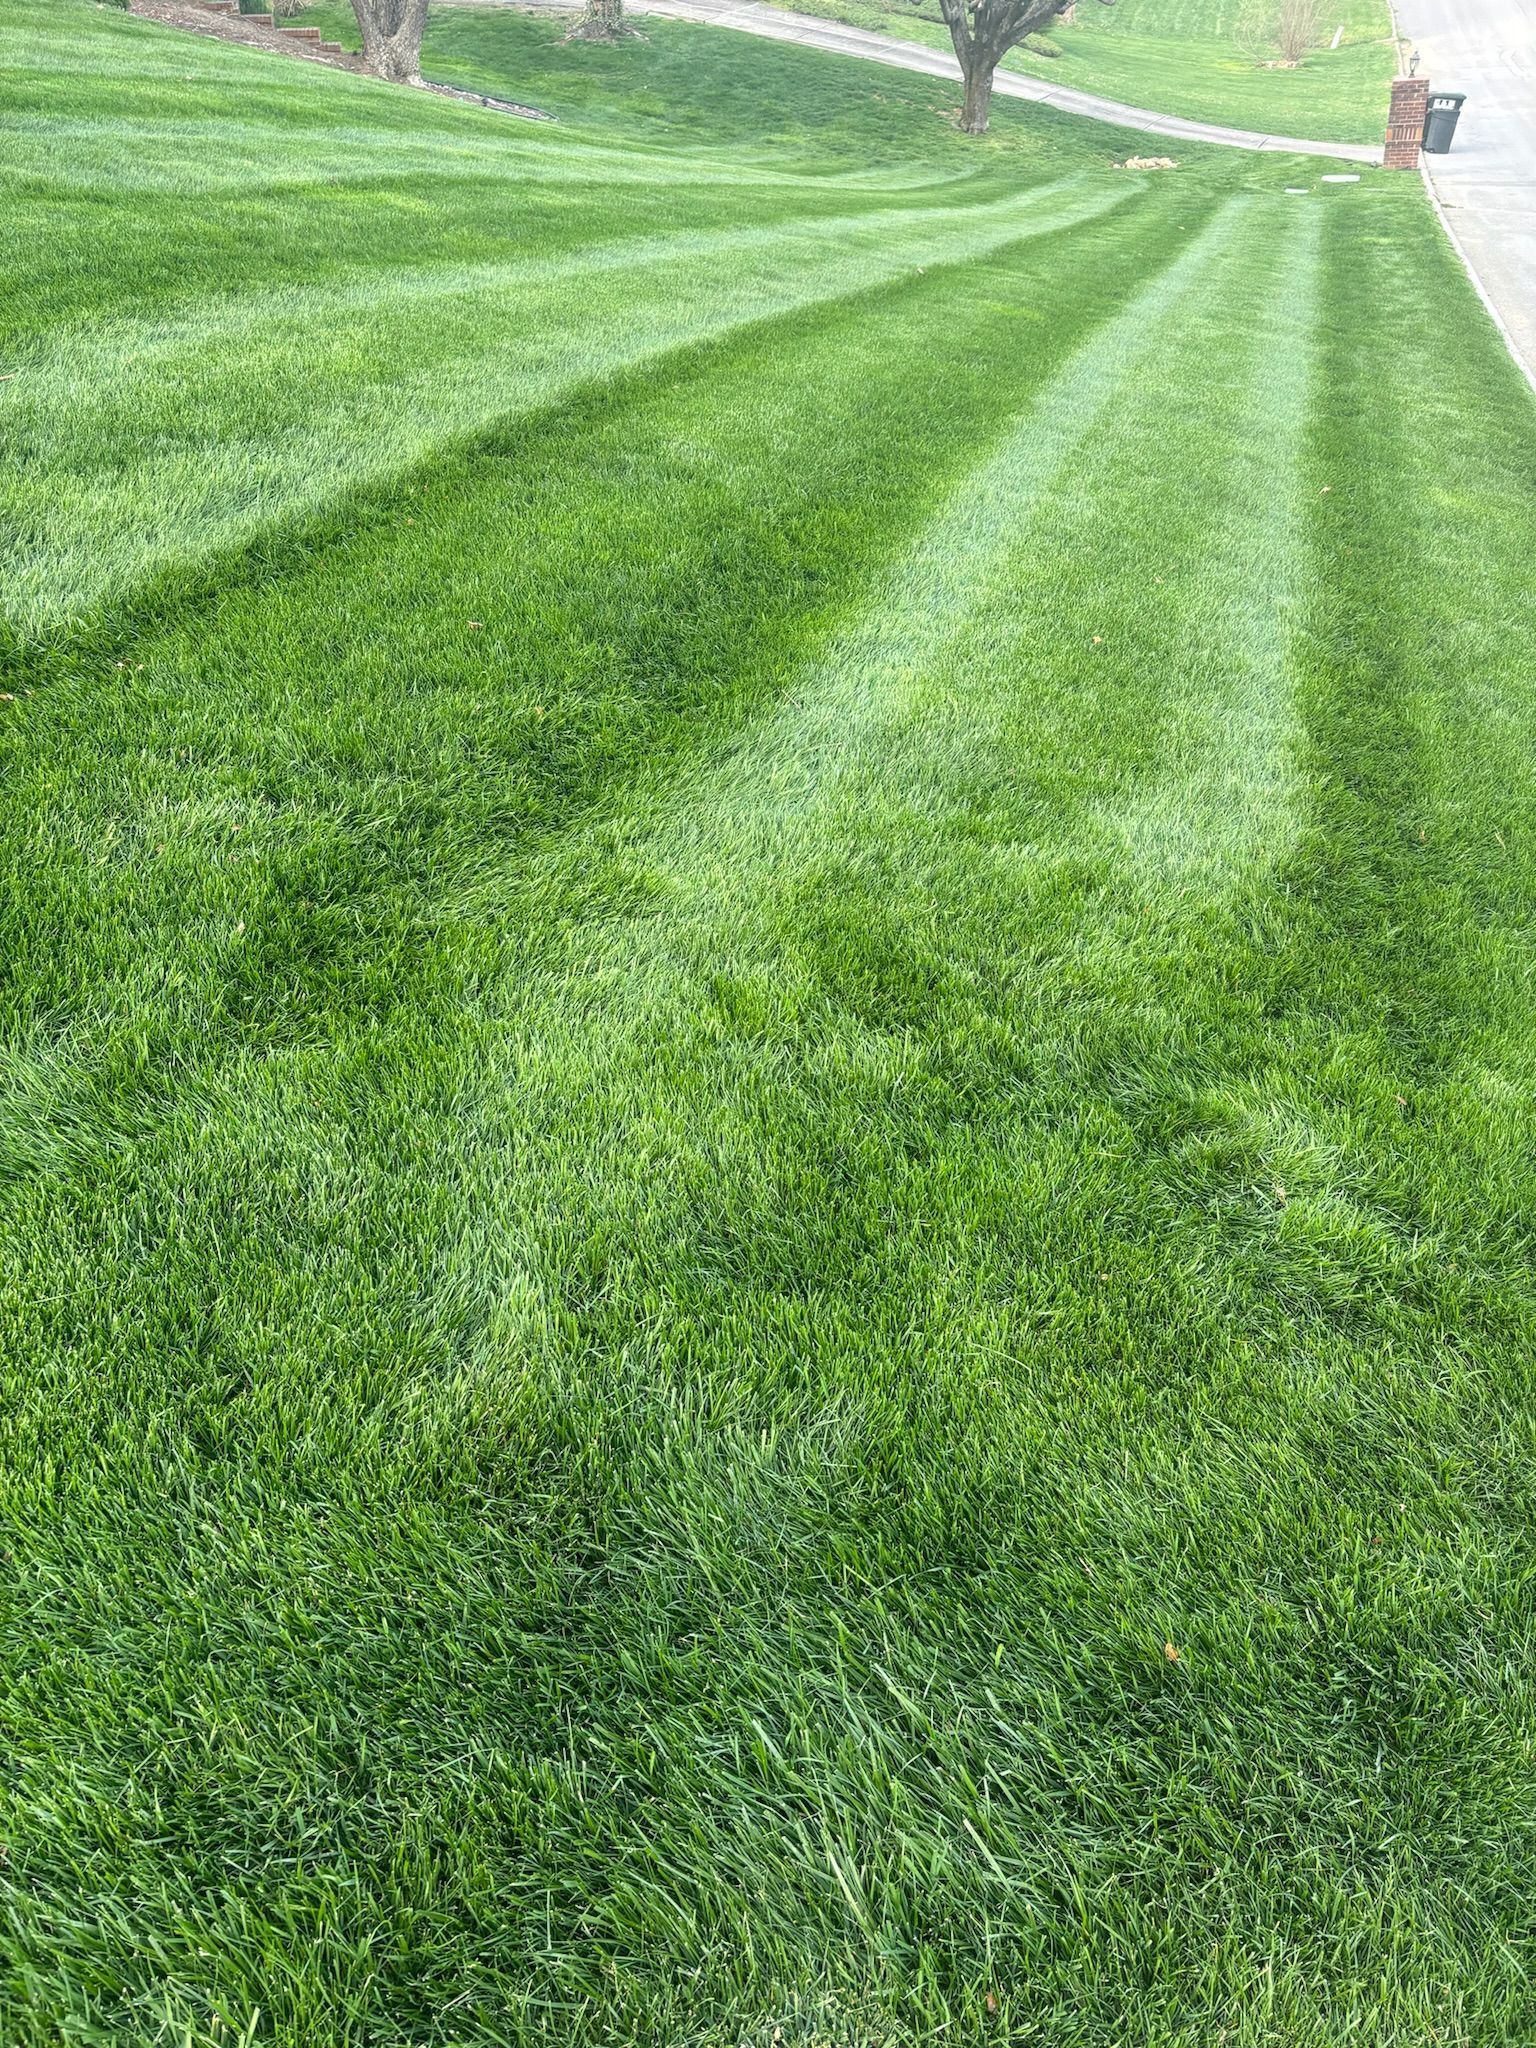 A close up of a lush green lawn with a striped pattern.